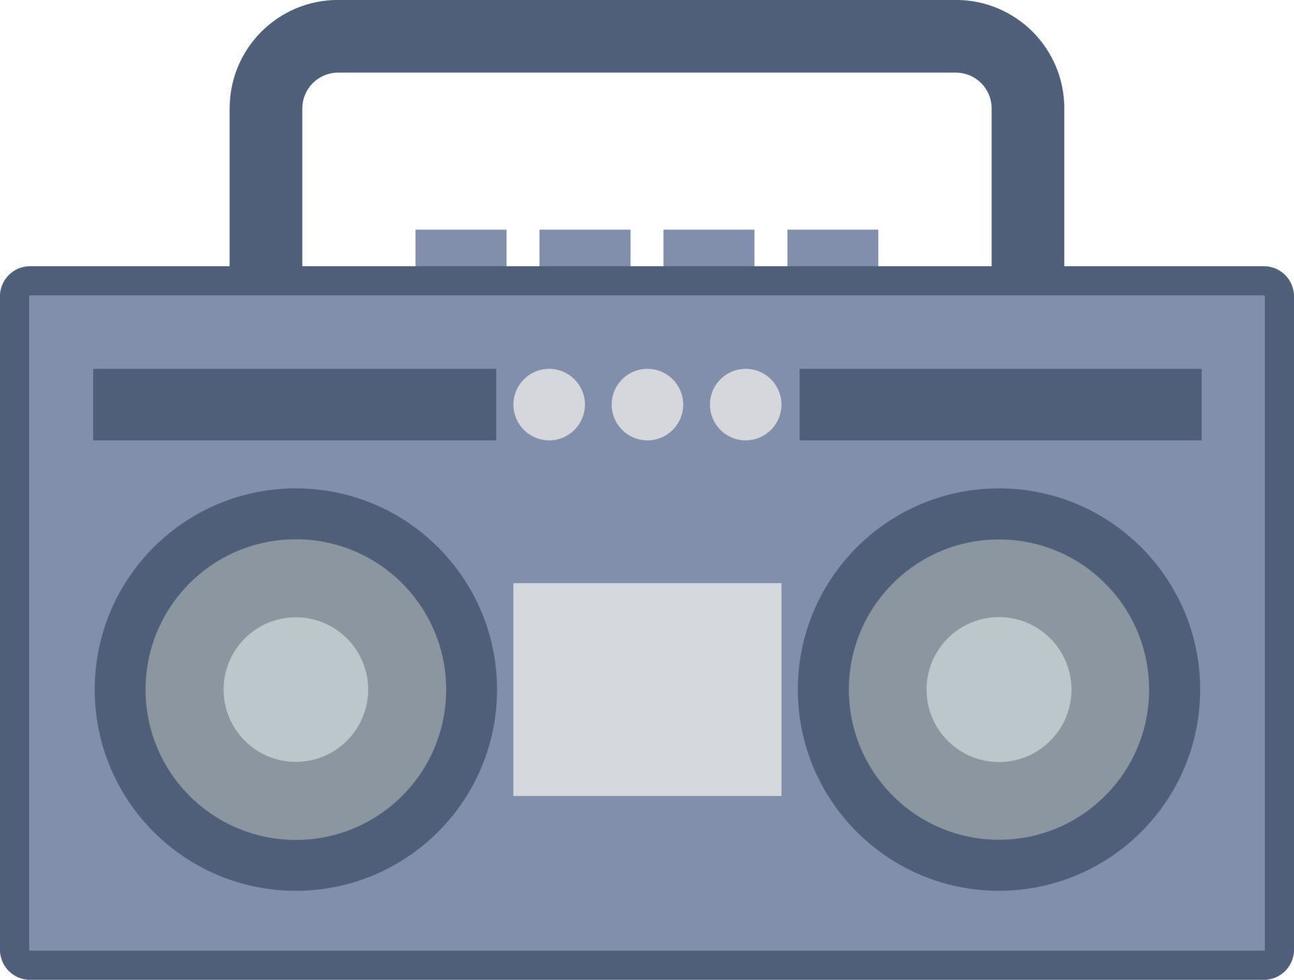 Vintage boombox radio icon with flat style for nostalgia design. Graphic resource of old style music audio sound system. Vector illustration of electronic device for music accesoris with retro style